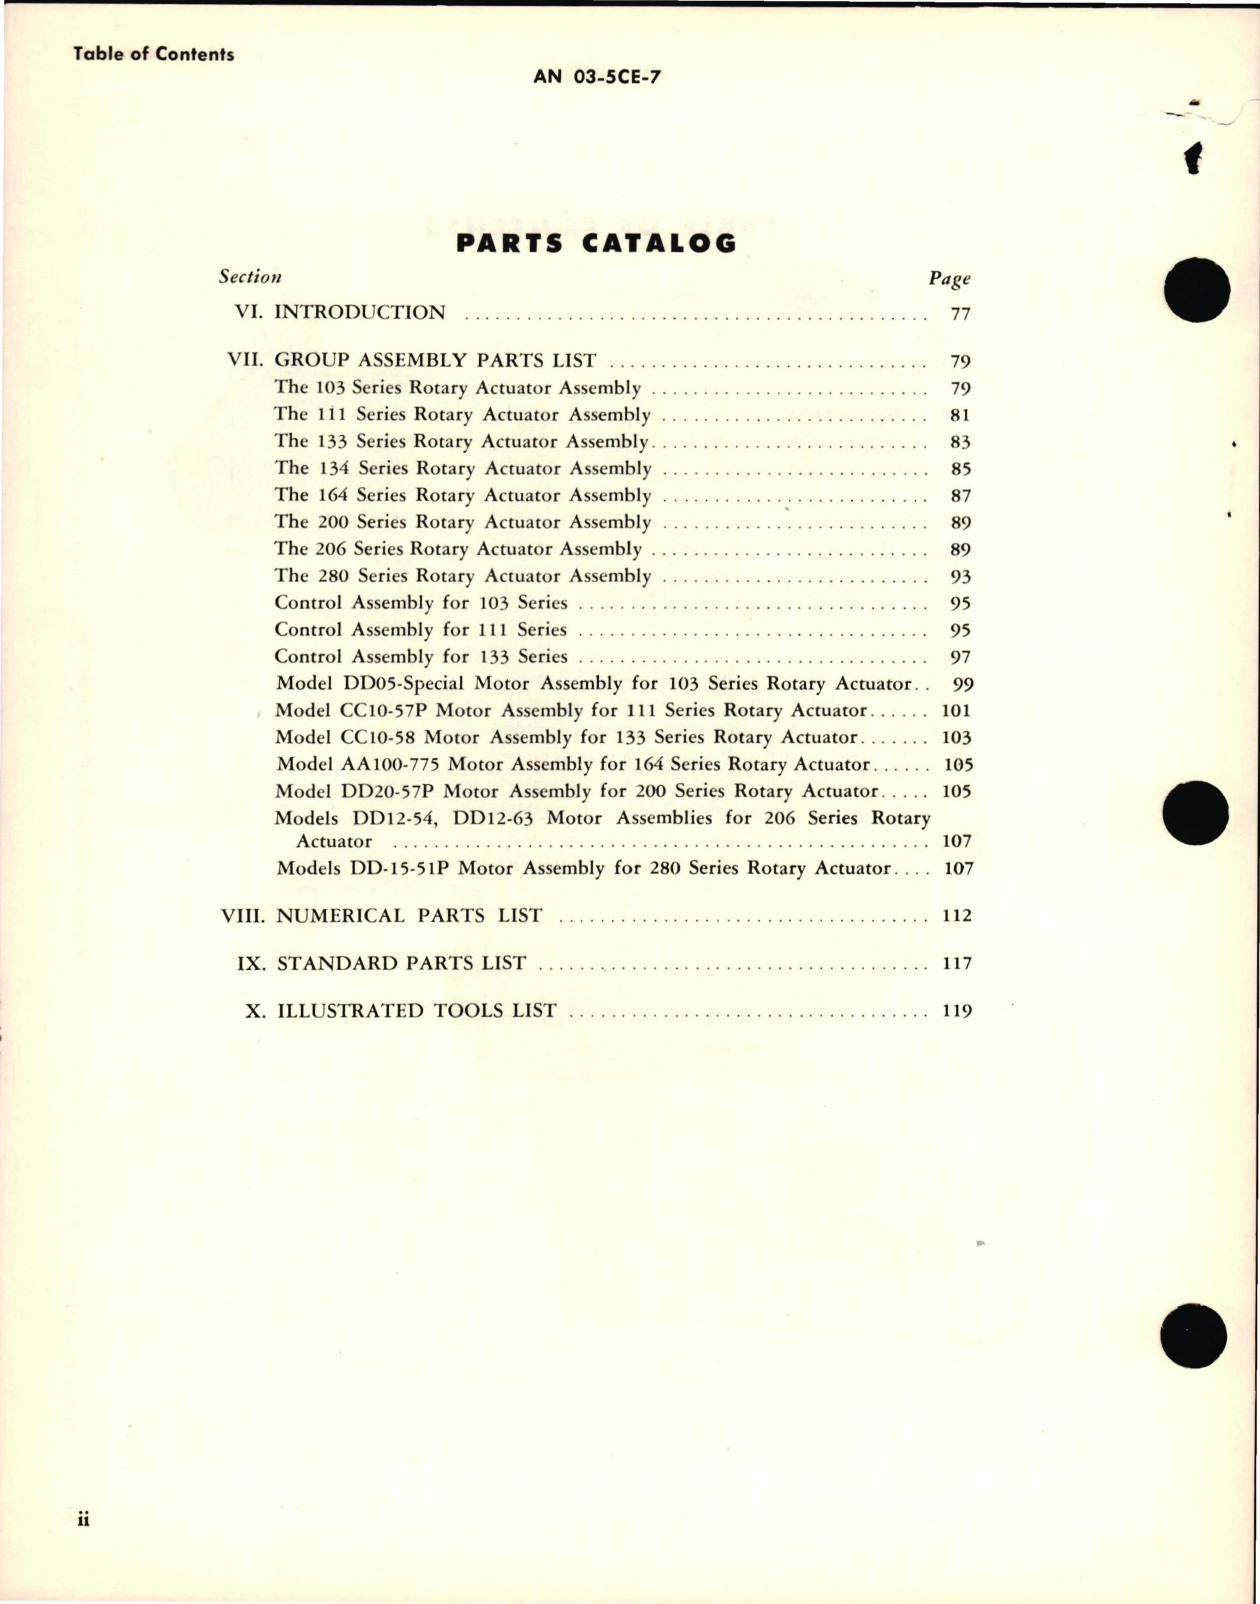 Sample page 8 from AirCorps Library document: Overhaul Instructions with Parts Catalog for Rotary Actuators